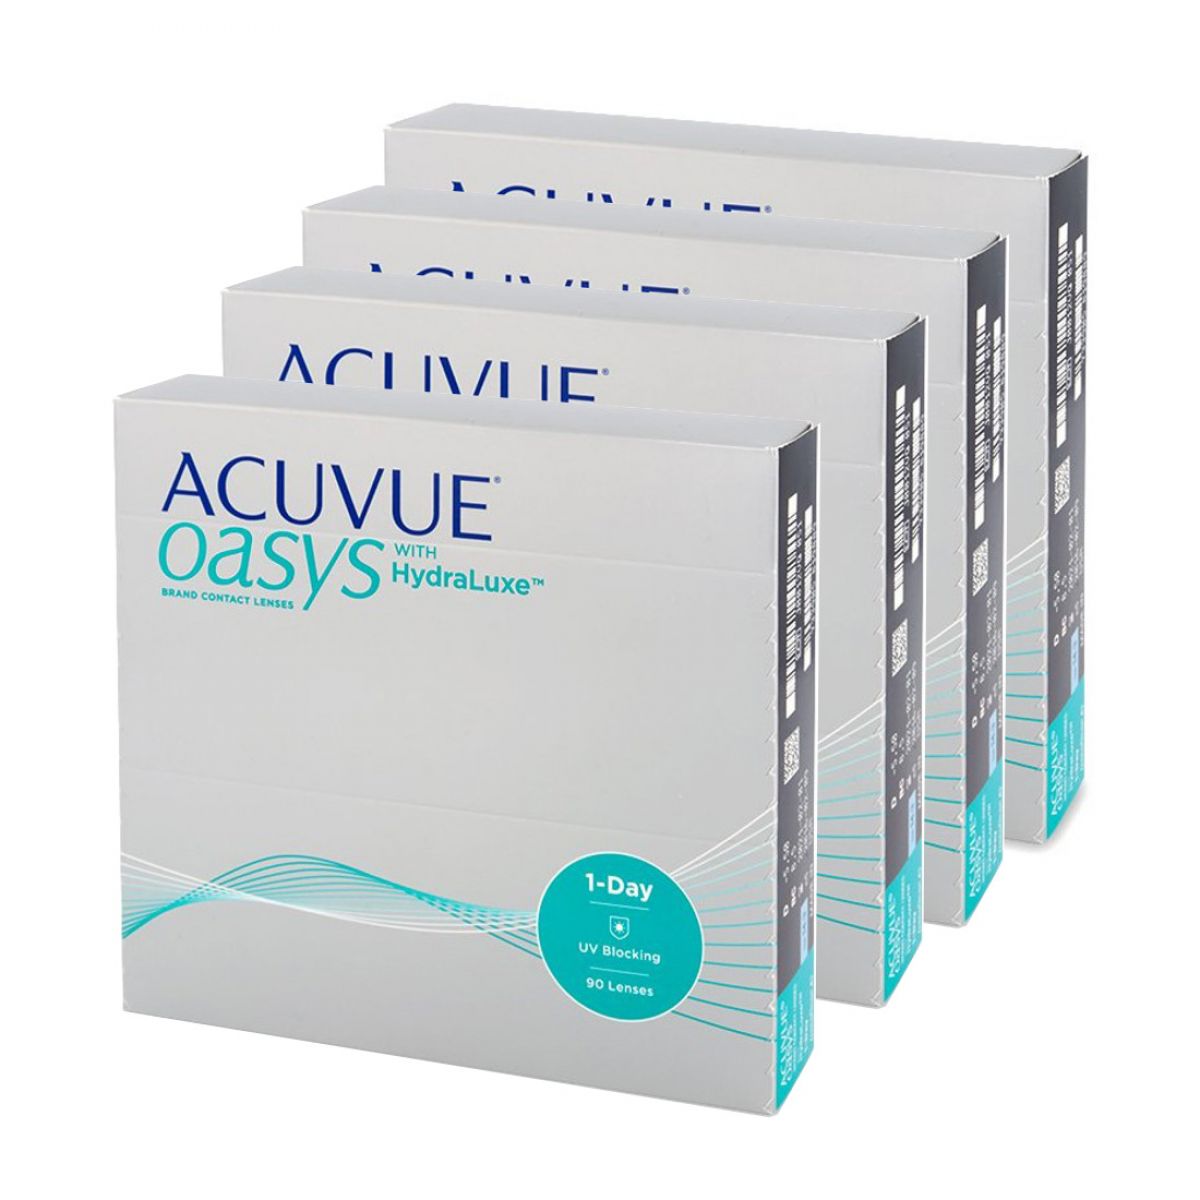 ACUVUE OASYS 1DAY 6 MONTHS SUPPLY (360 LENSES)